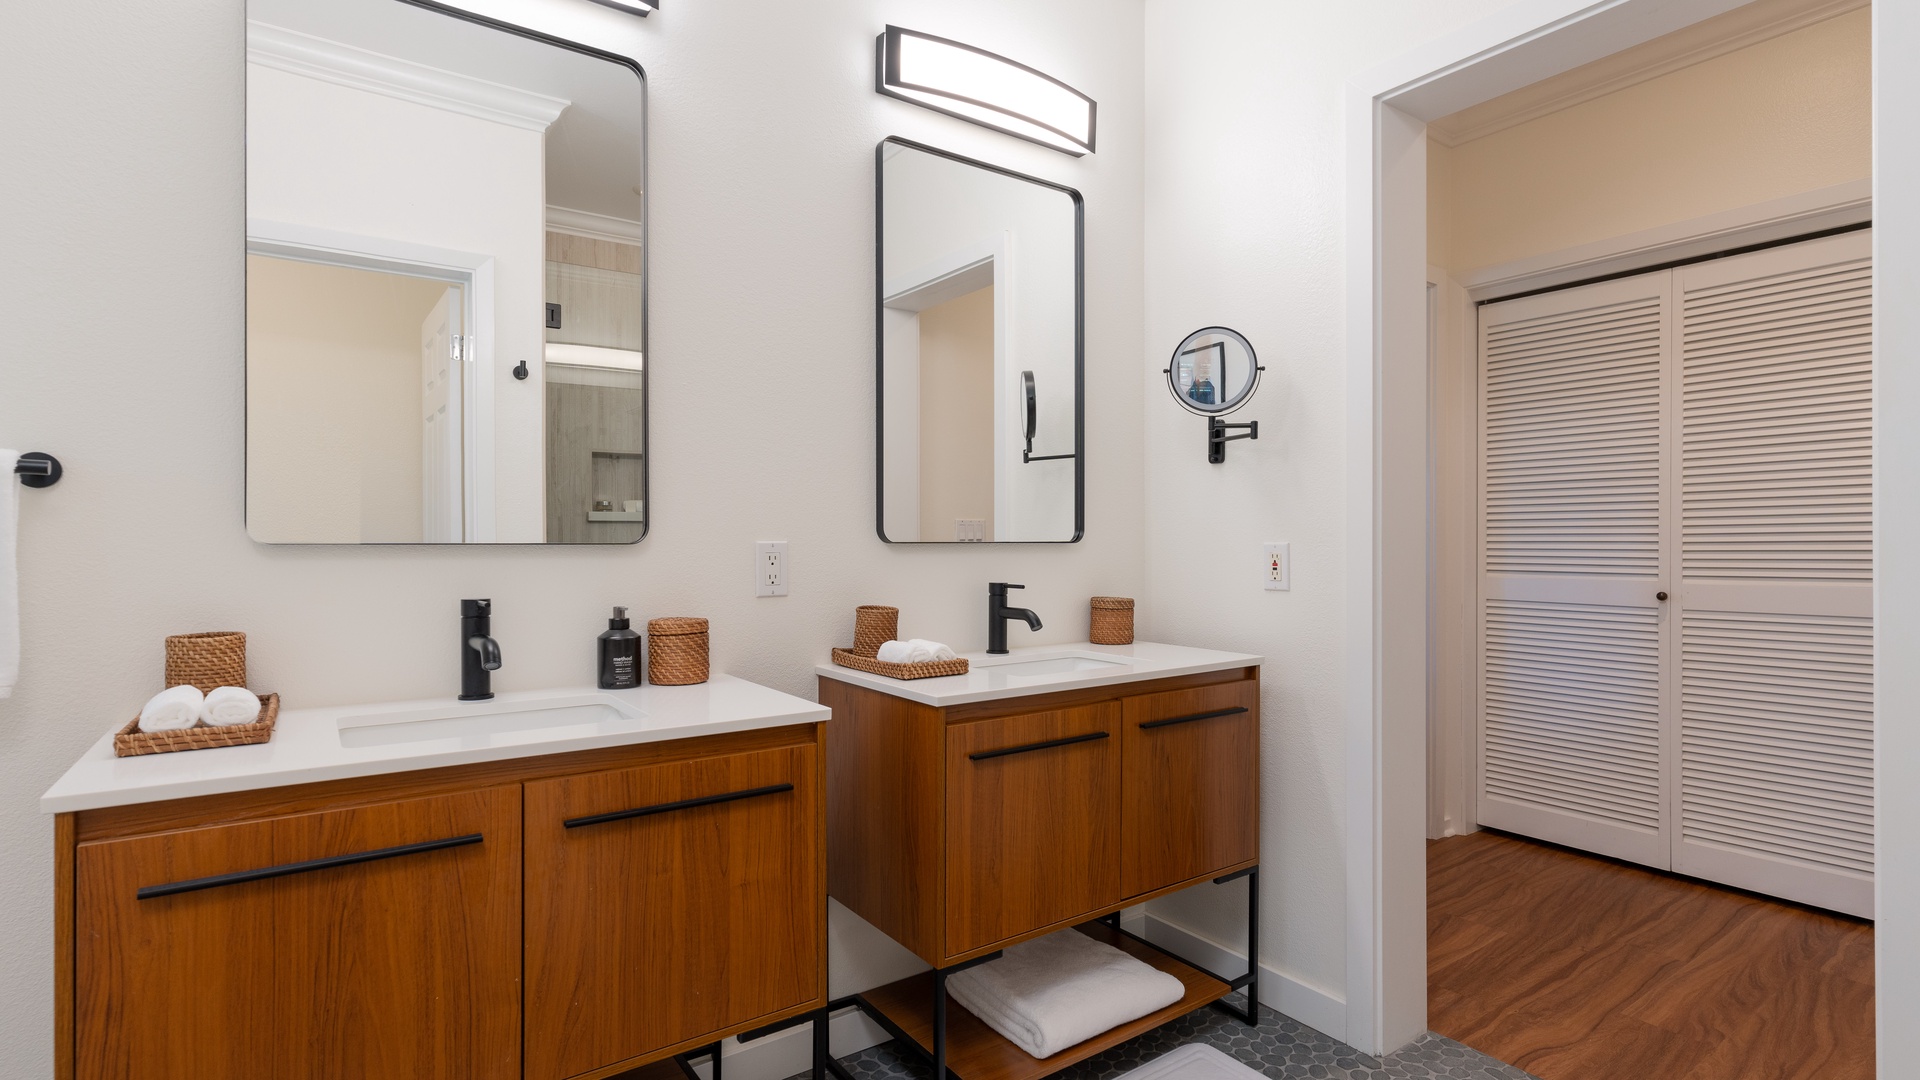 Kapolei Vacation Rentals, Coconut Plantation 1136-4 - The primary guest bathroom with ample lighting and dual vanities.